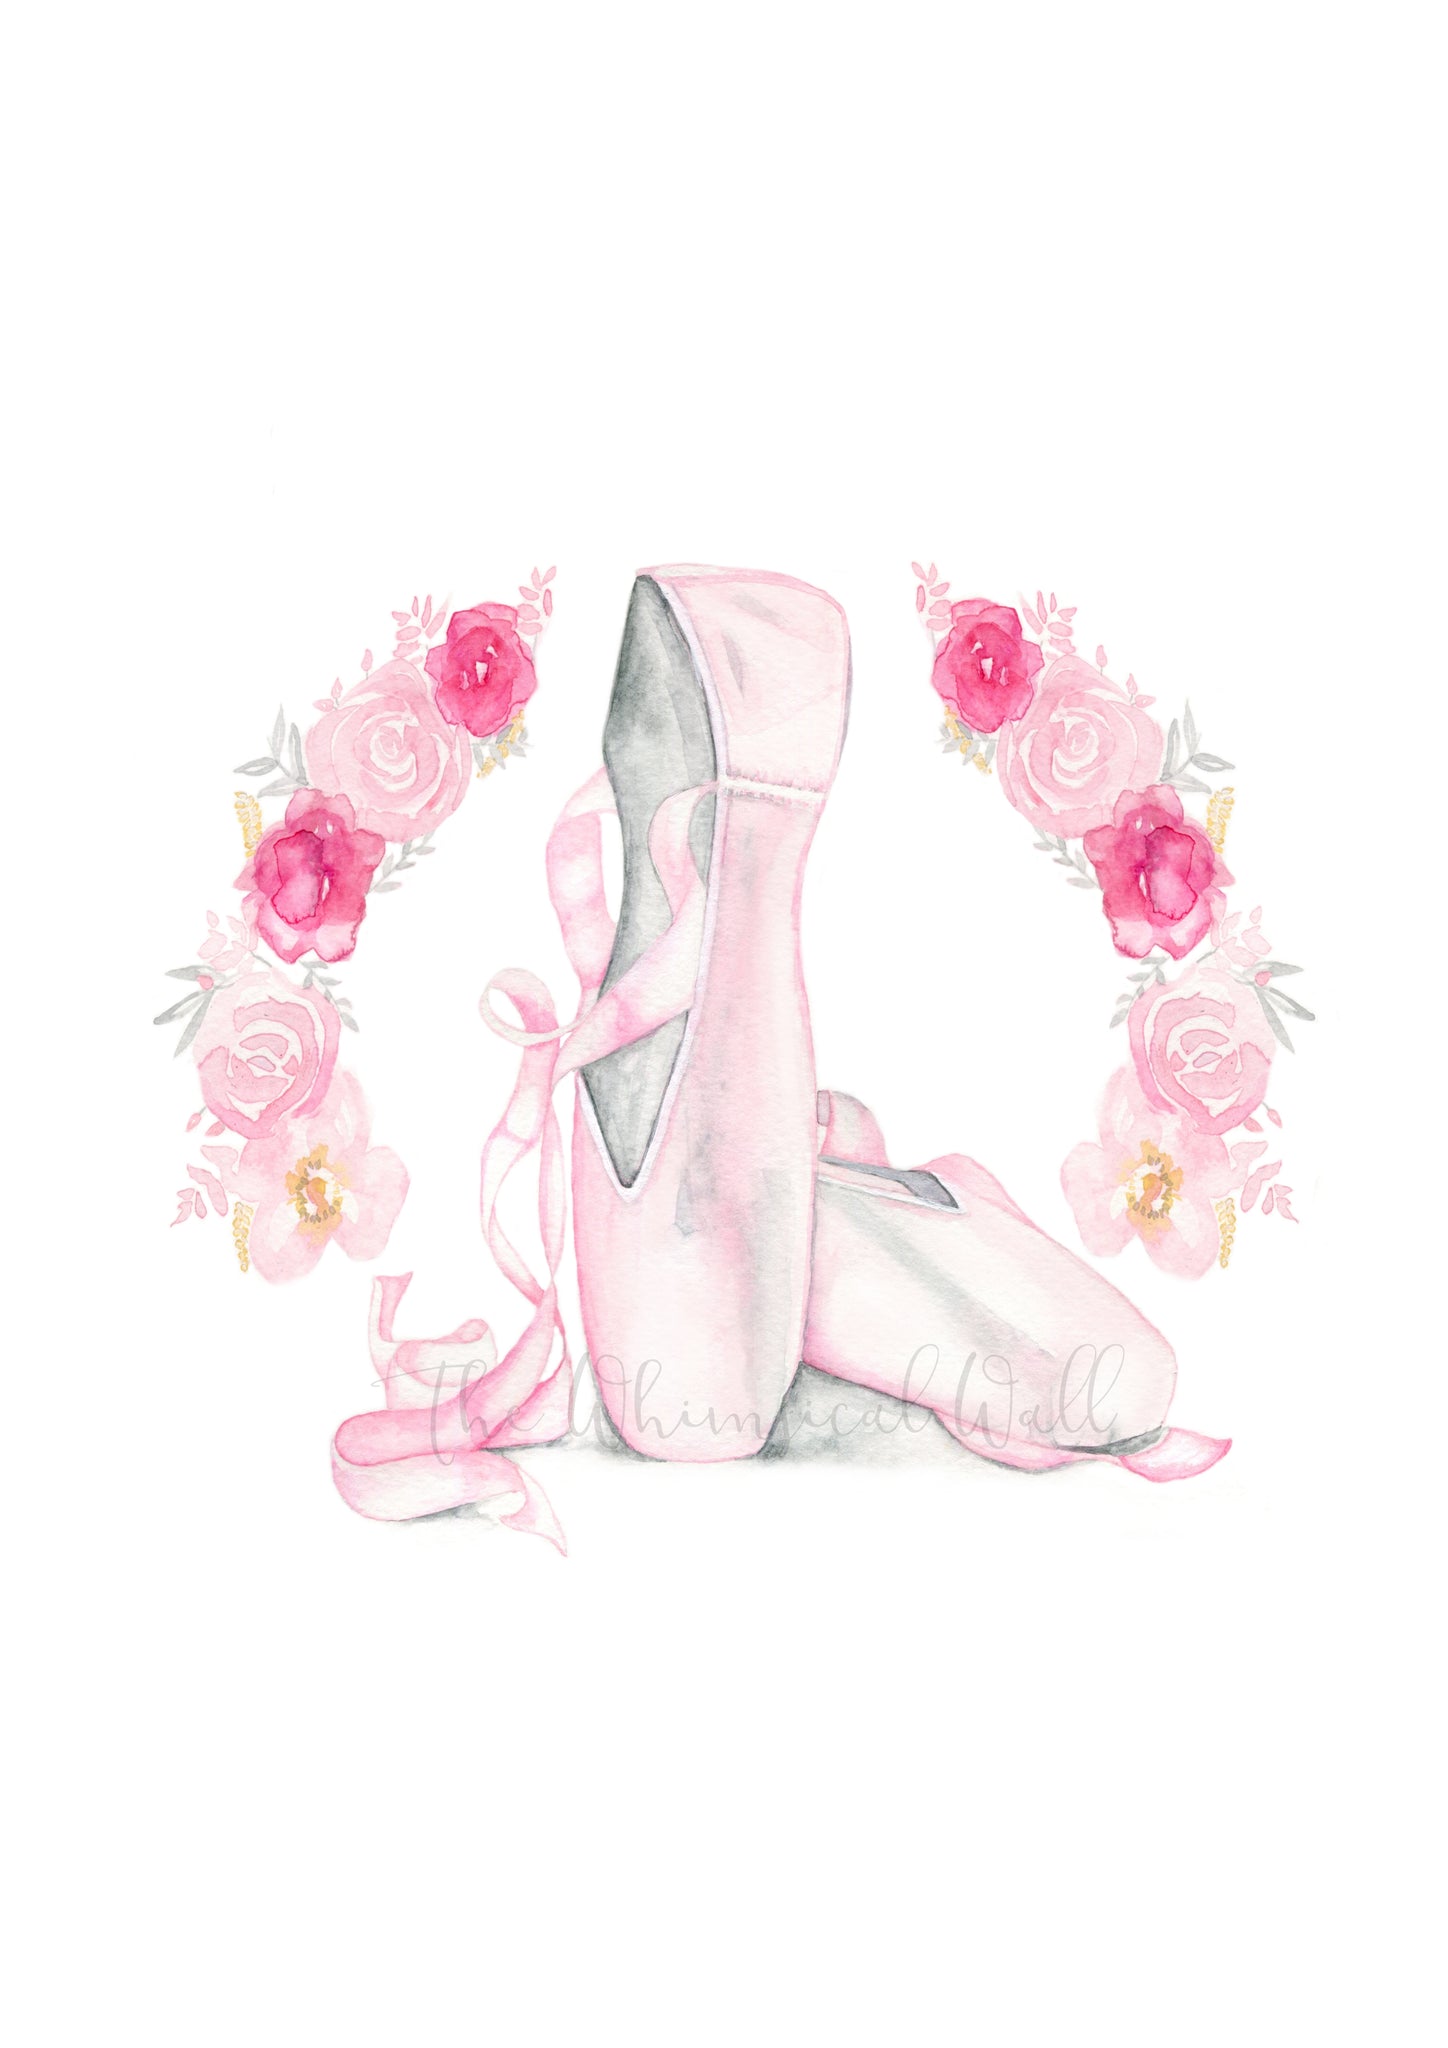 Ballet Shoes – The Whimsical Wall